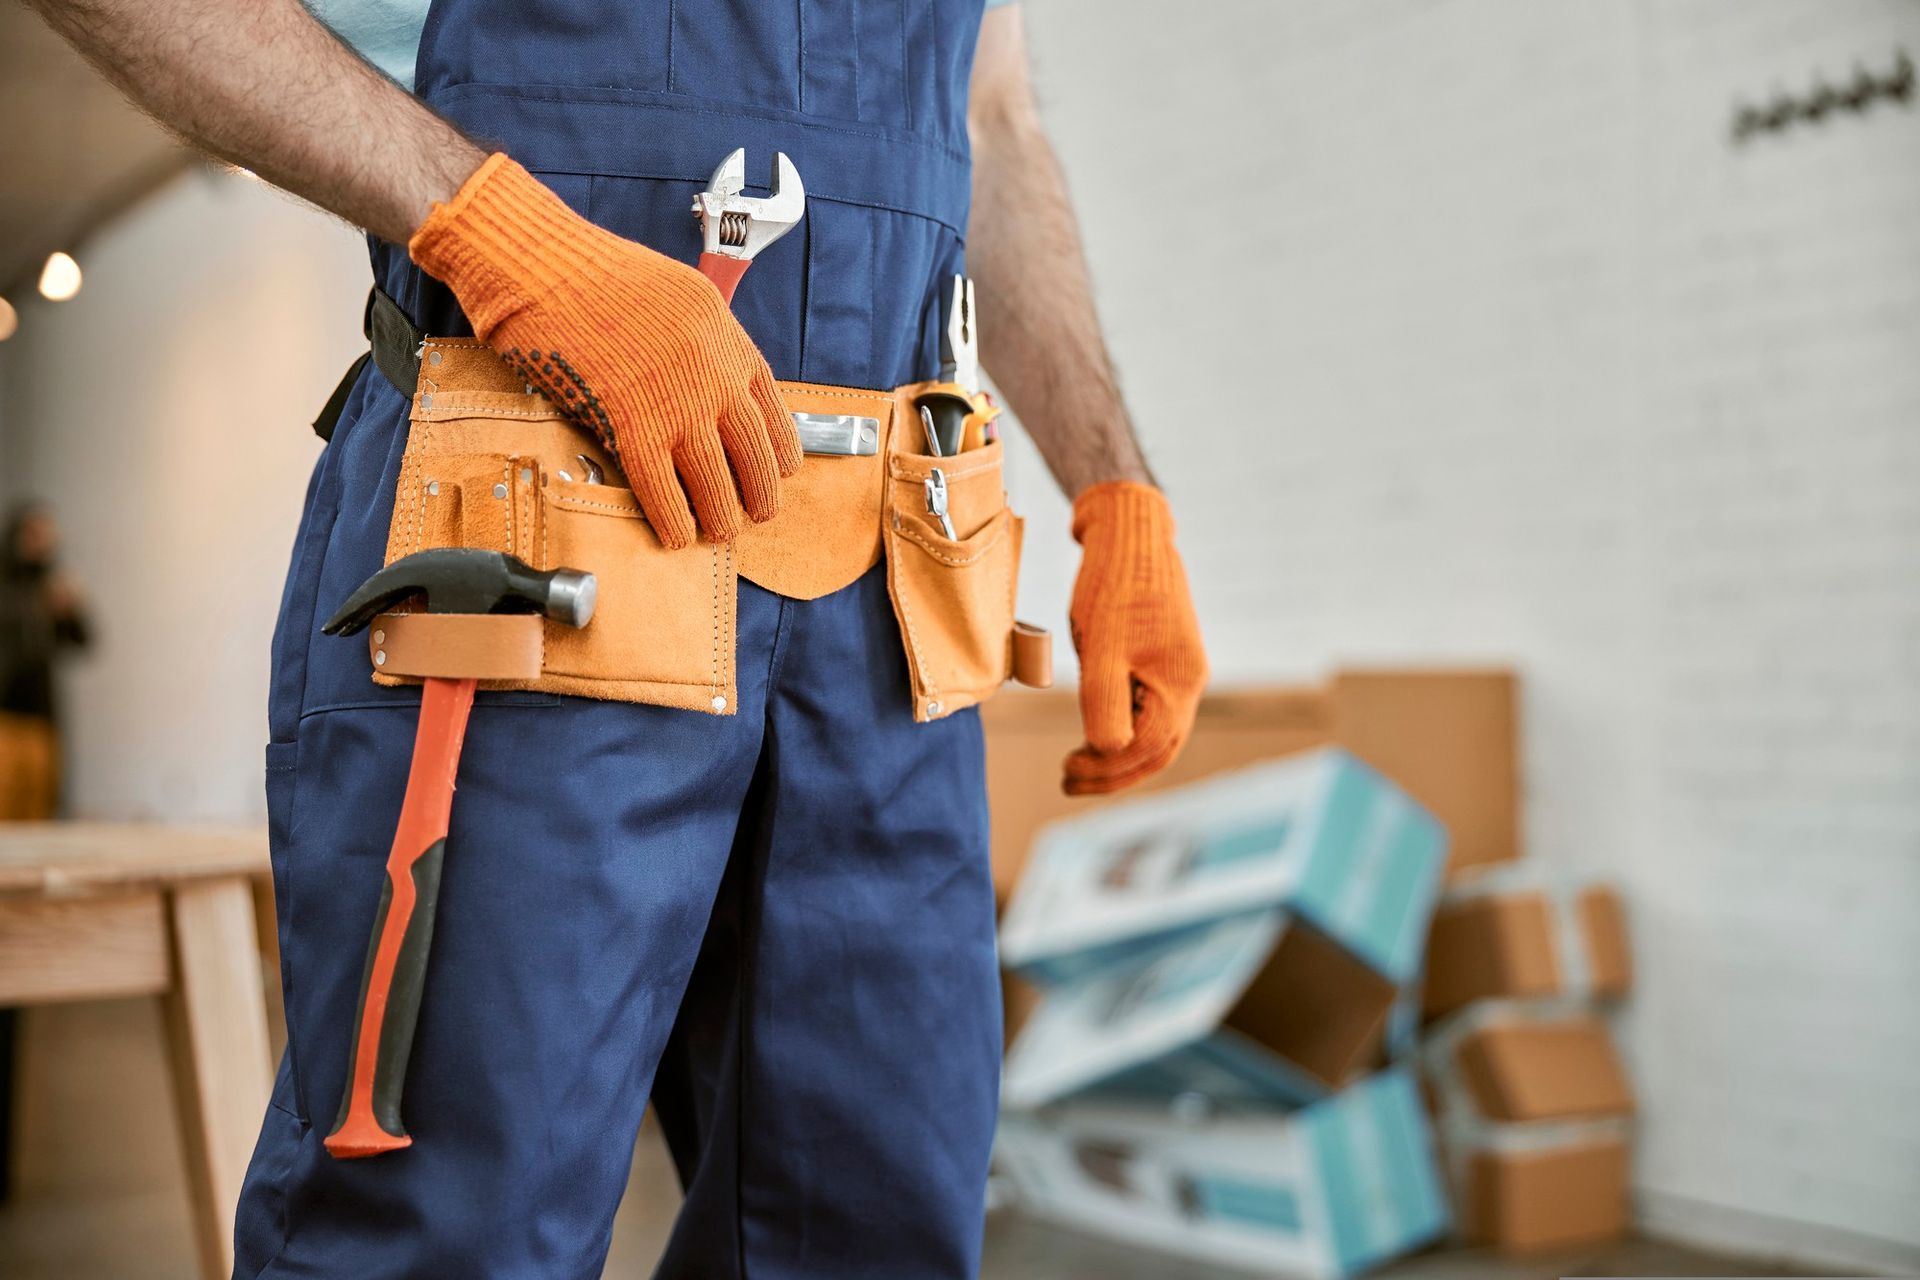 a man wearing blue overalls and orange gloves is holding a hammer and wrench